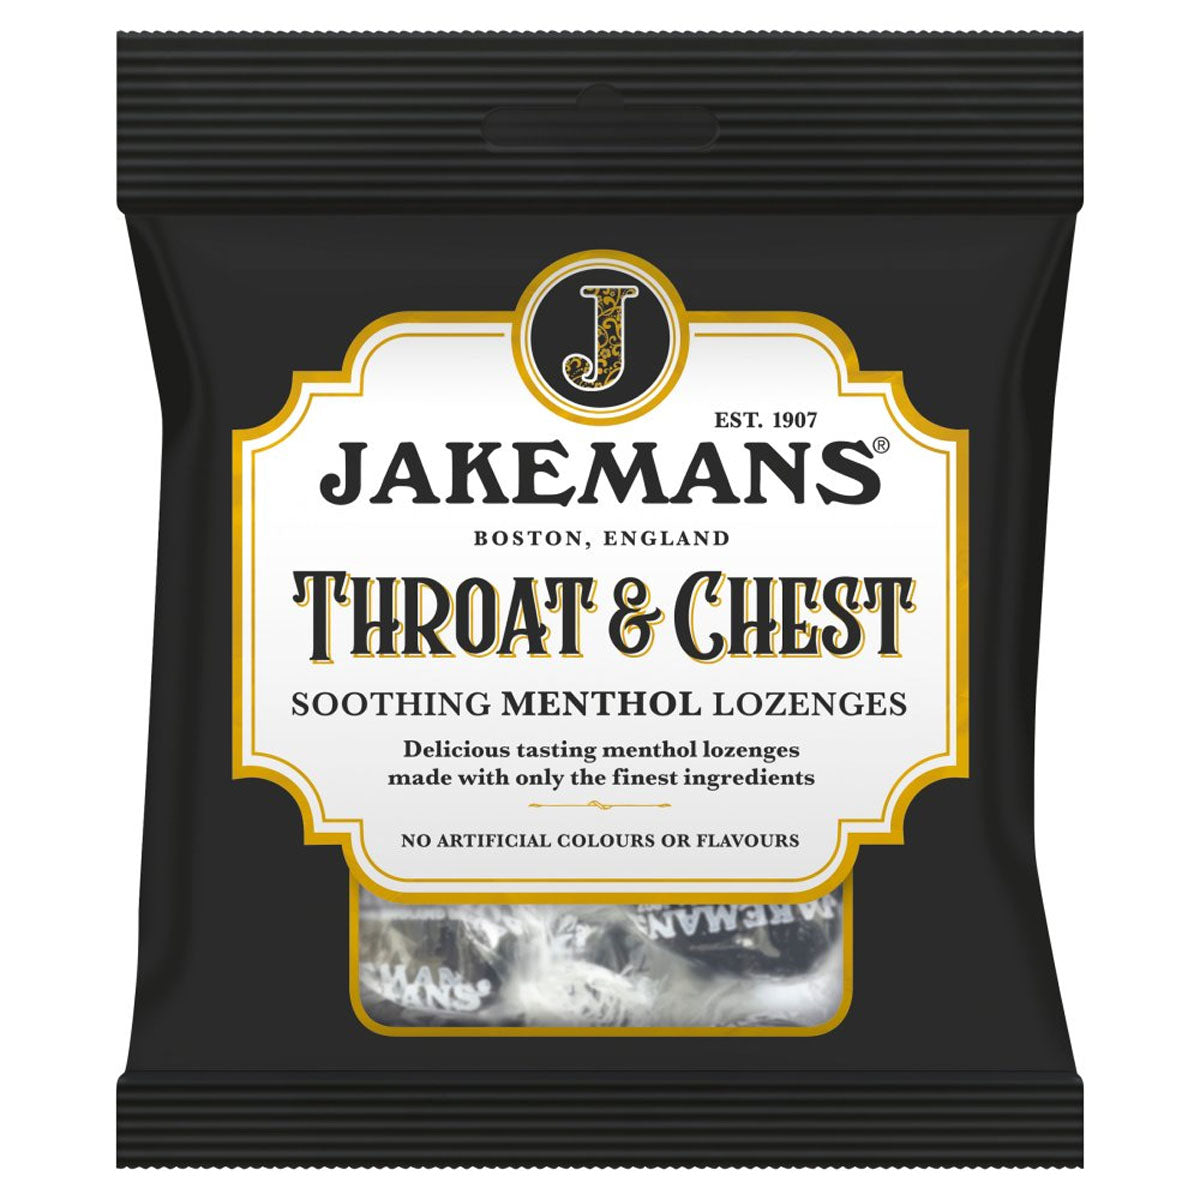 Jakemans - Throat & Chest Soothing Menthol Lozenges - 73g - Continental Food Store